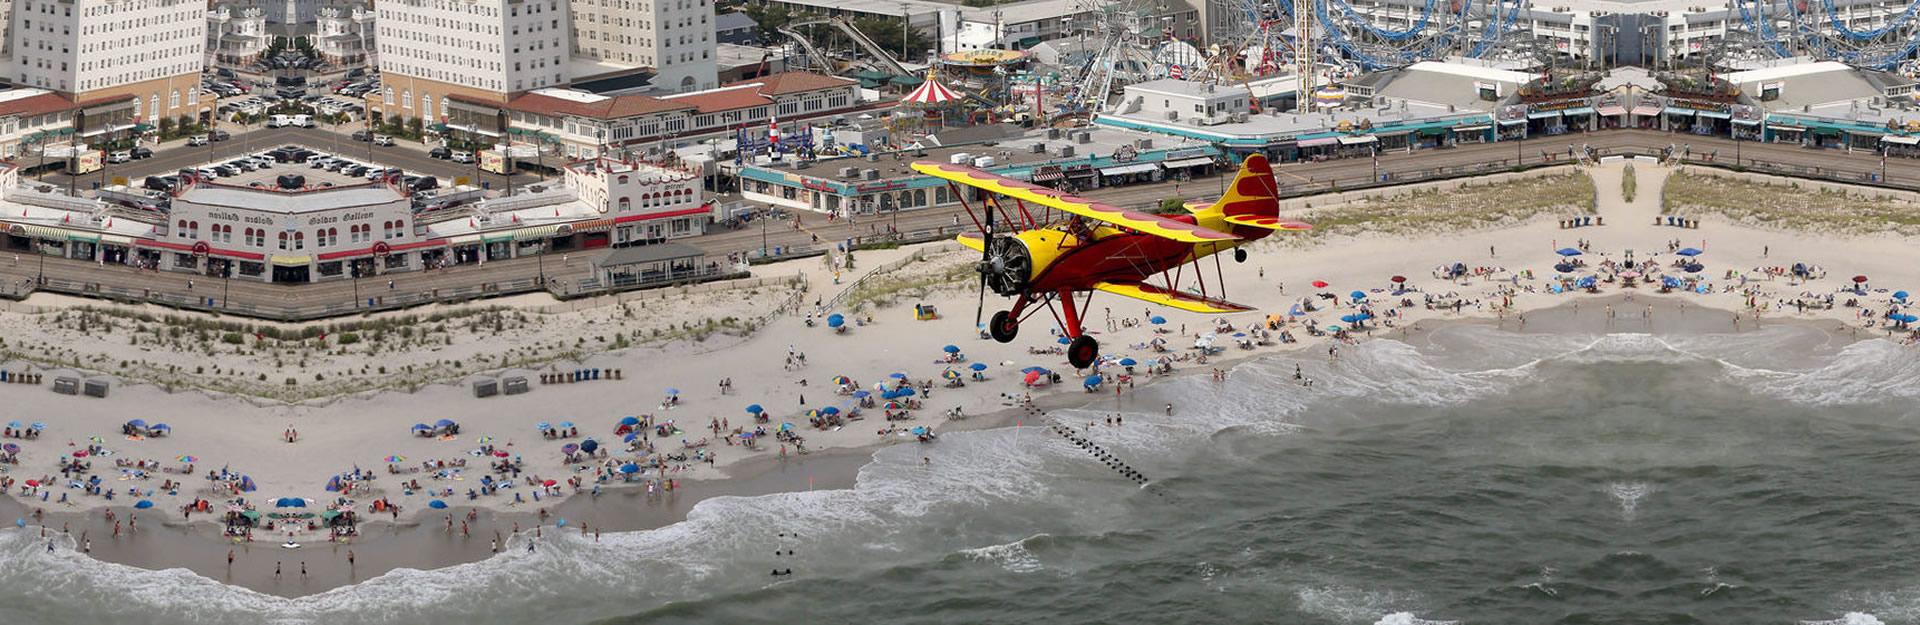 Image of an airplane flying over the Jersey Shore